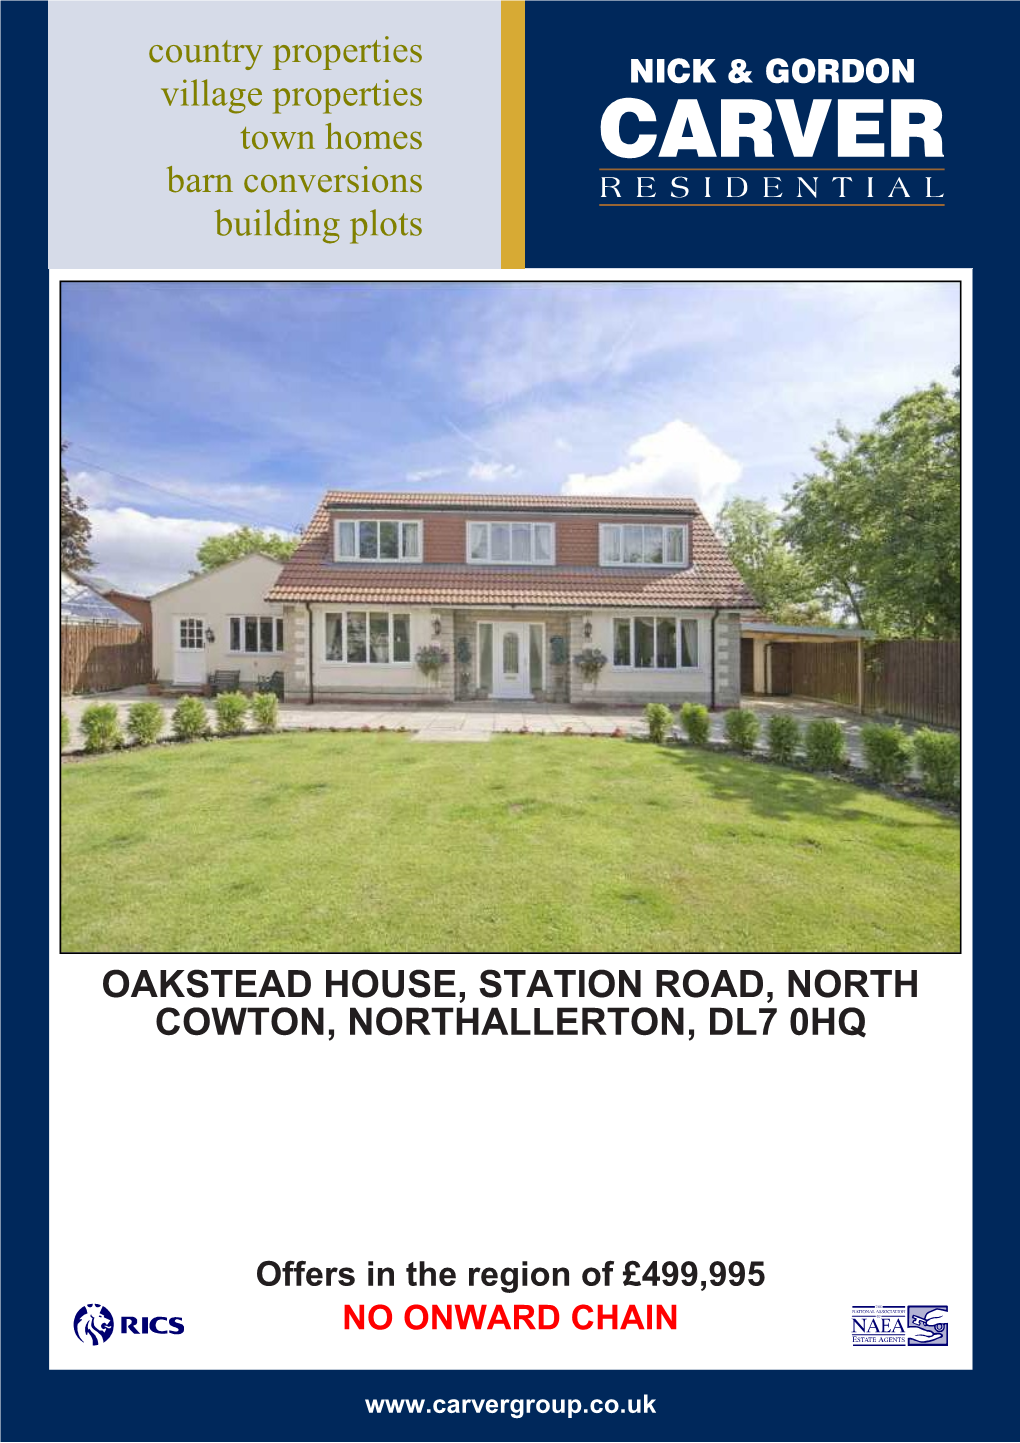 Oakstead House, Station Road, North Cowton, Northallerton, Dl7 0Hq